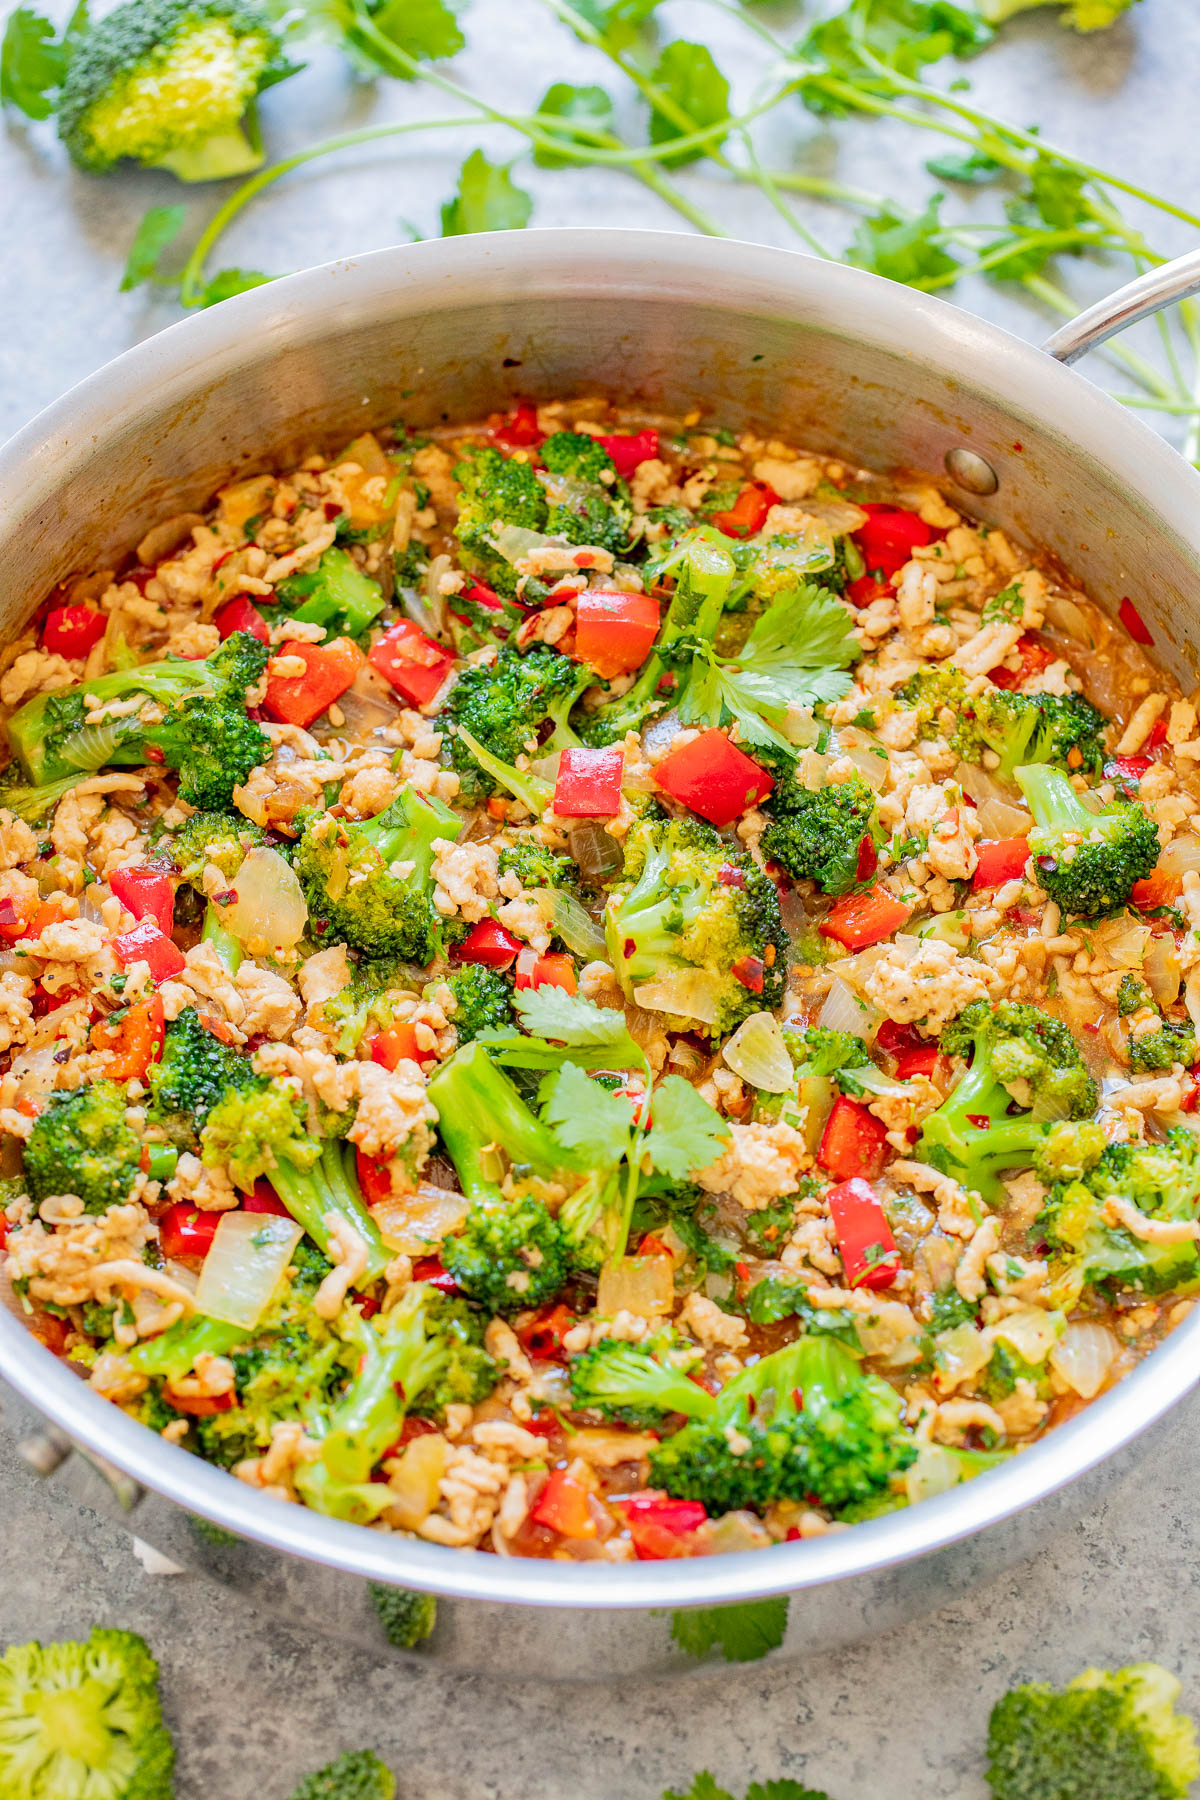 Sweet Chili Ground Chicken and Broccoli Stir Fry - EASY, ready in 30 minutes, made in ONE skillet, and layered with Asian-inspired flavors! Juicy chicken, crisp-tender broccoli, red bell peppers, and more are coated with sweet chili sauce, soy sauce, sesame oil, and finished with fresh cilantro for a pop of freshness! 